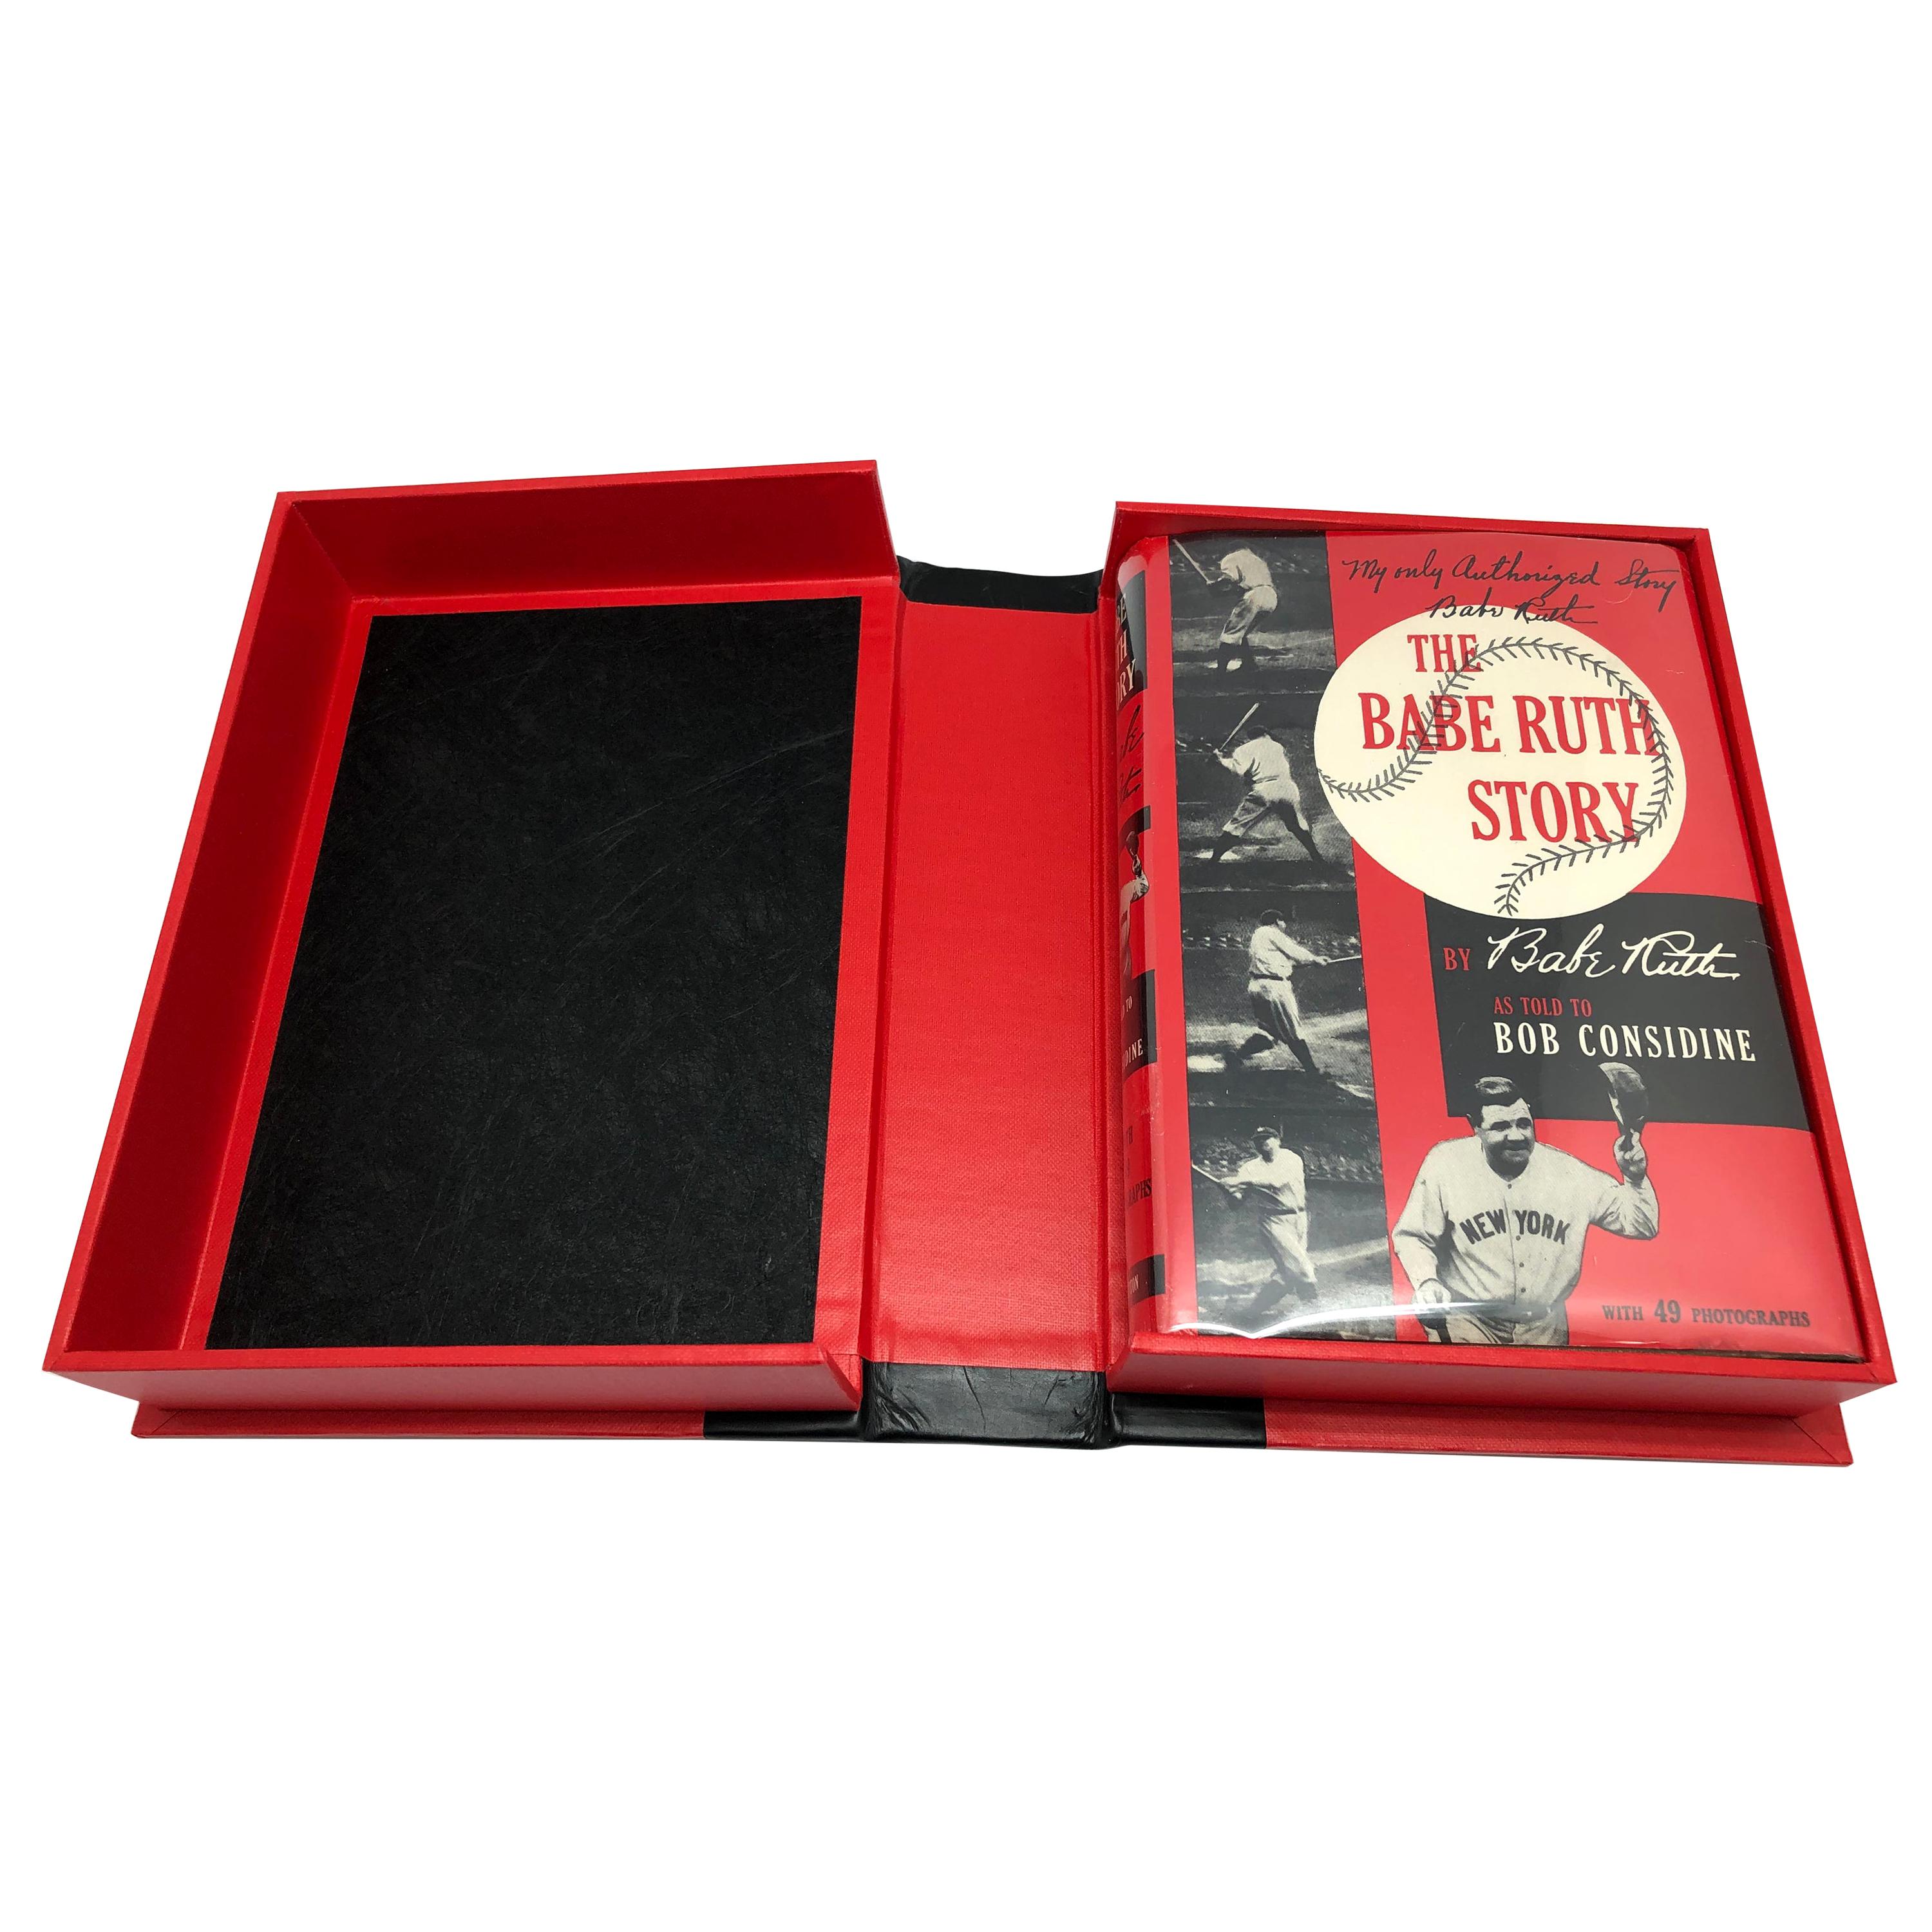 "The Babe Ruth Story" by Babe Ruth, Signed and Inscribed, First Edition, 1948